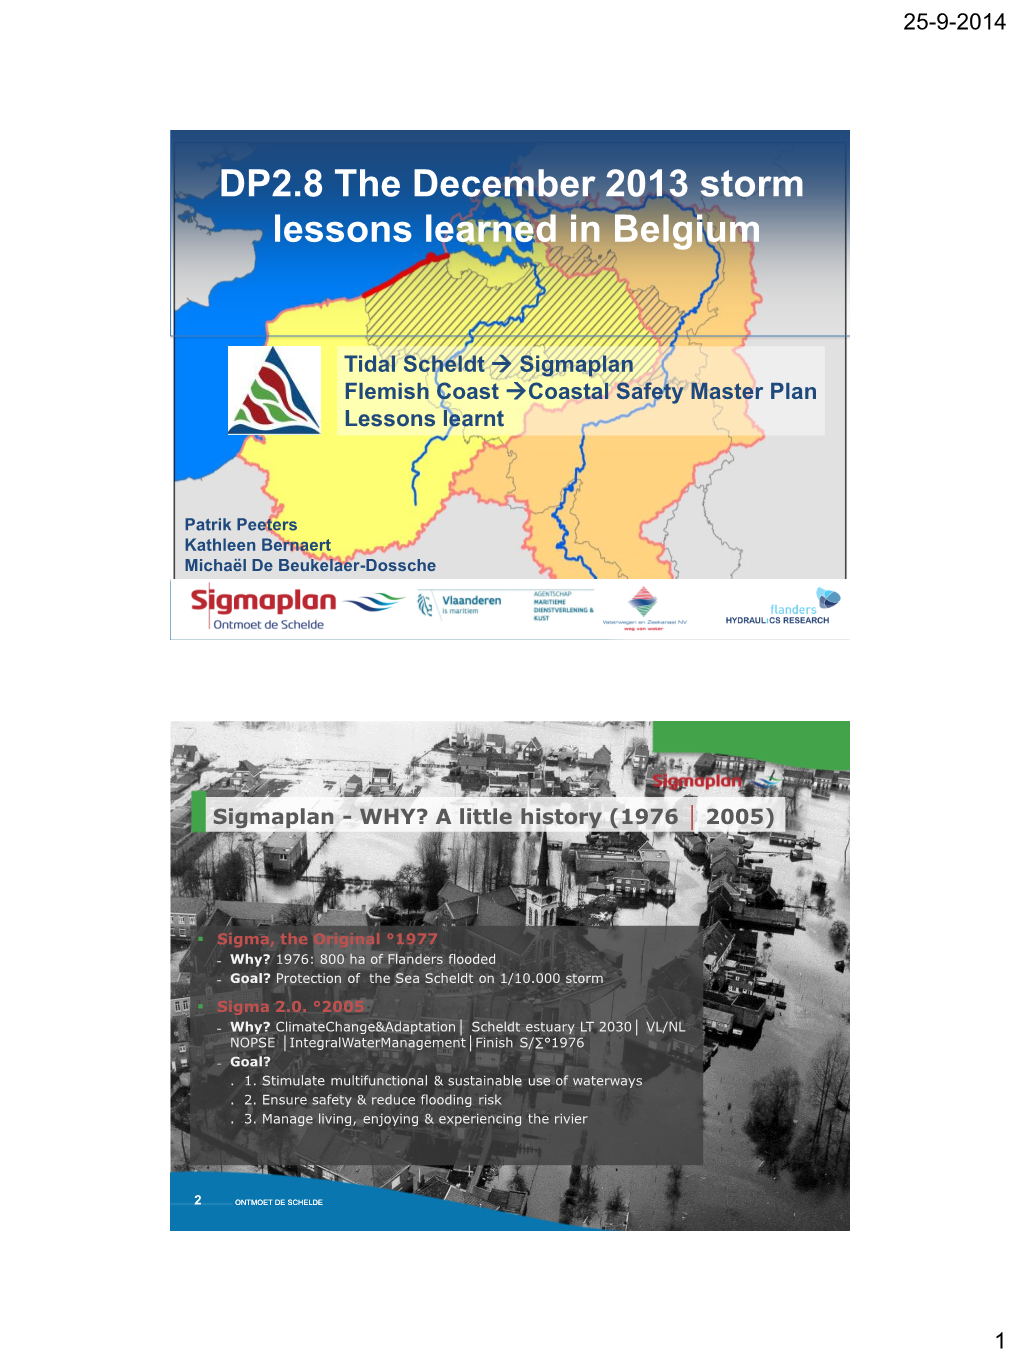 DP2.8 the December 2013 Storm Lessons Learned in Belgium